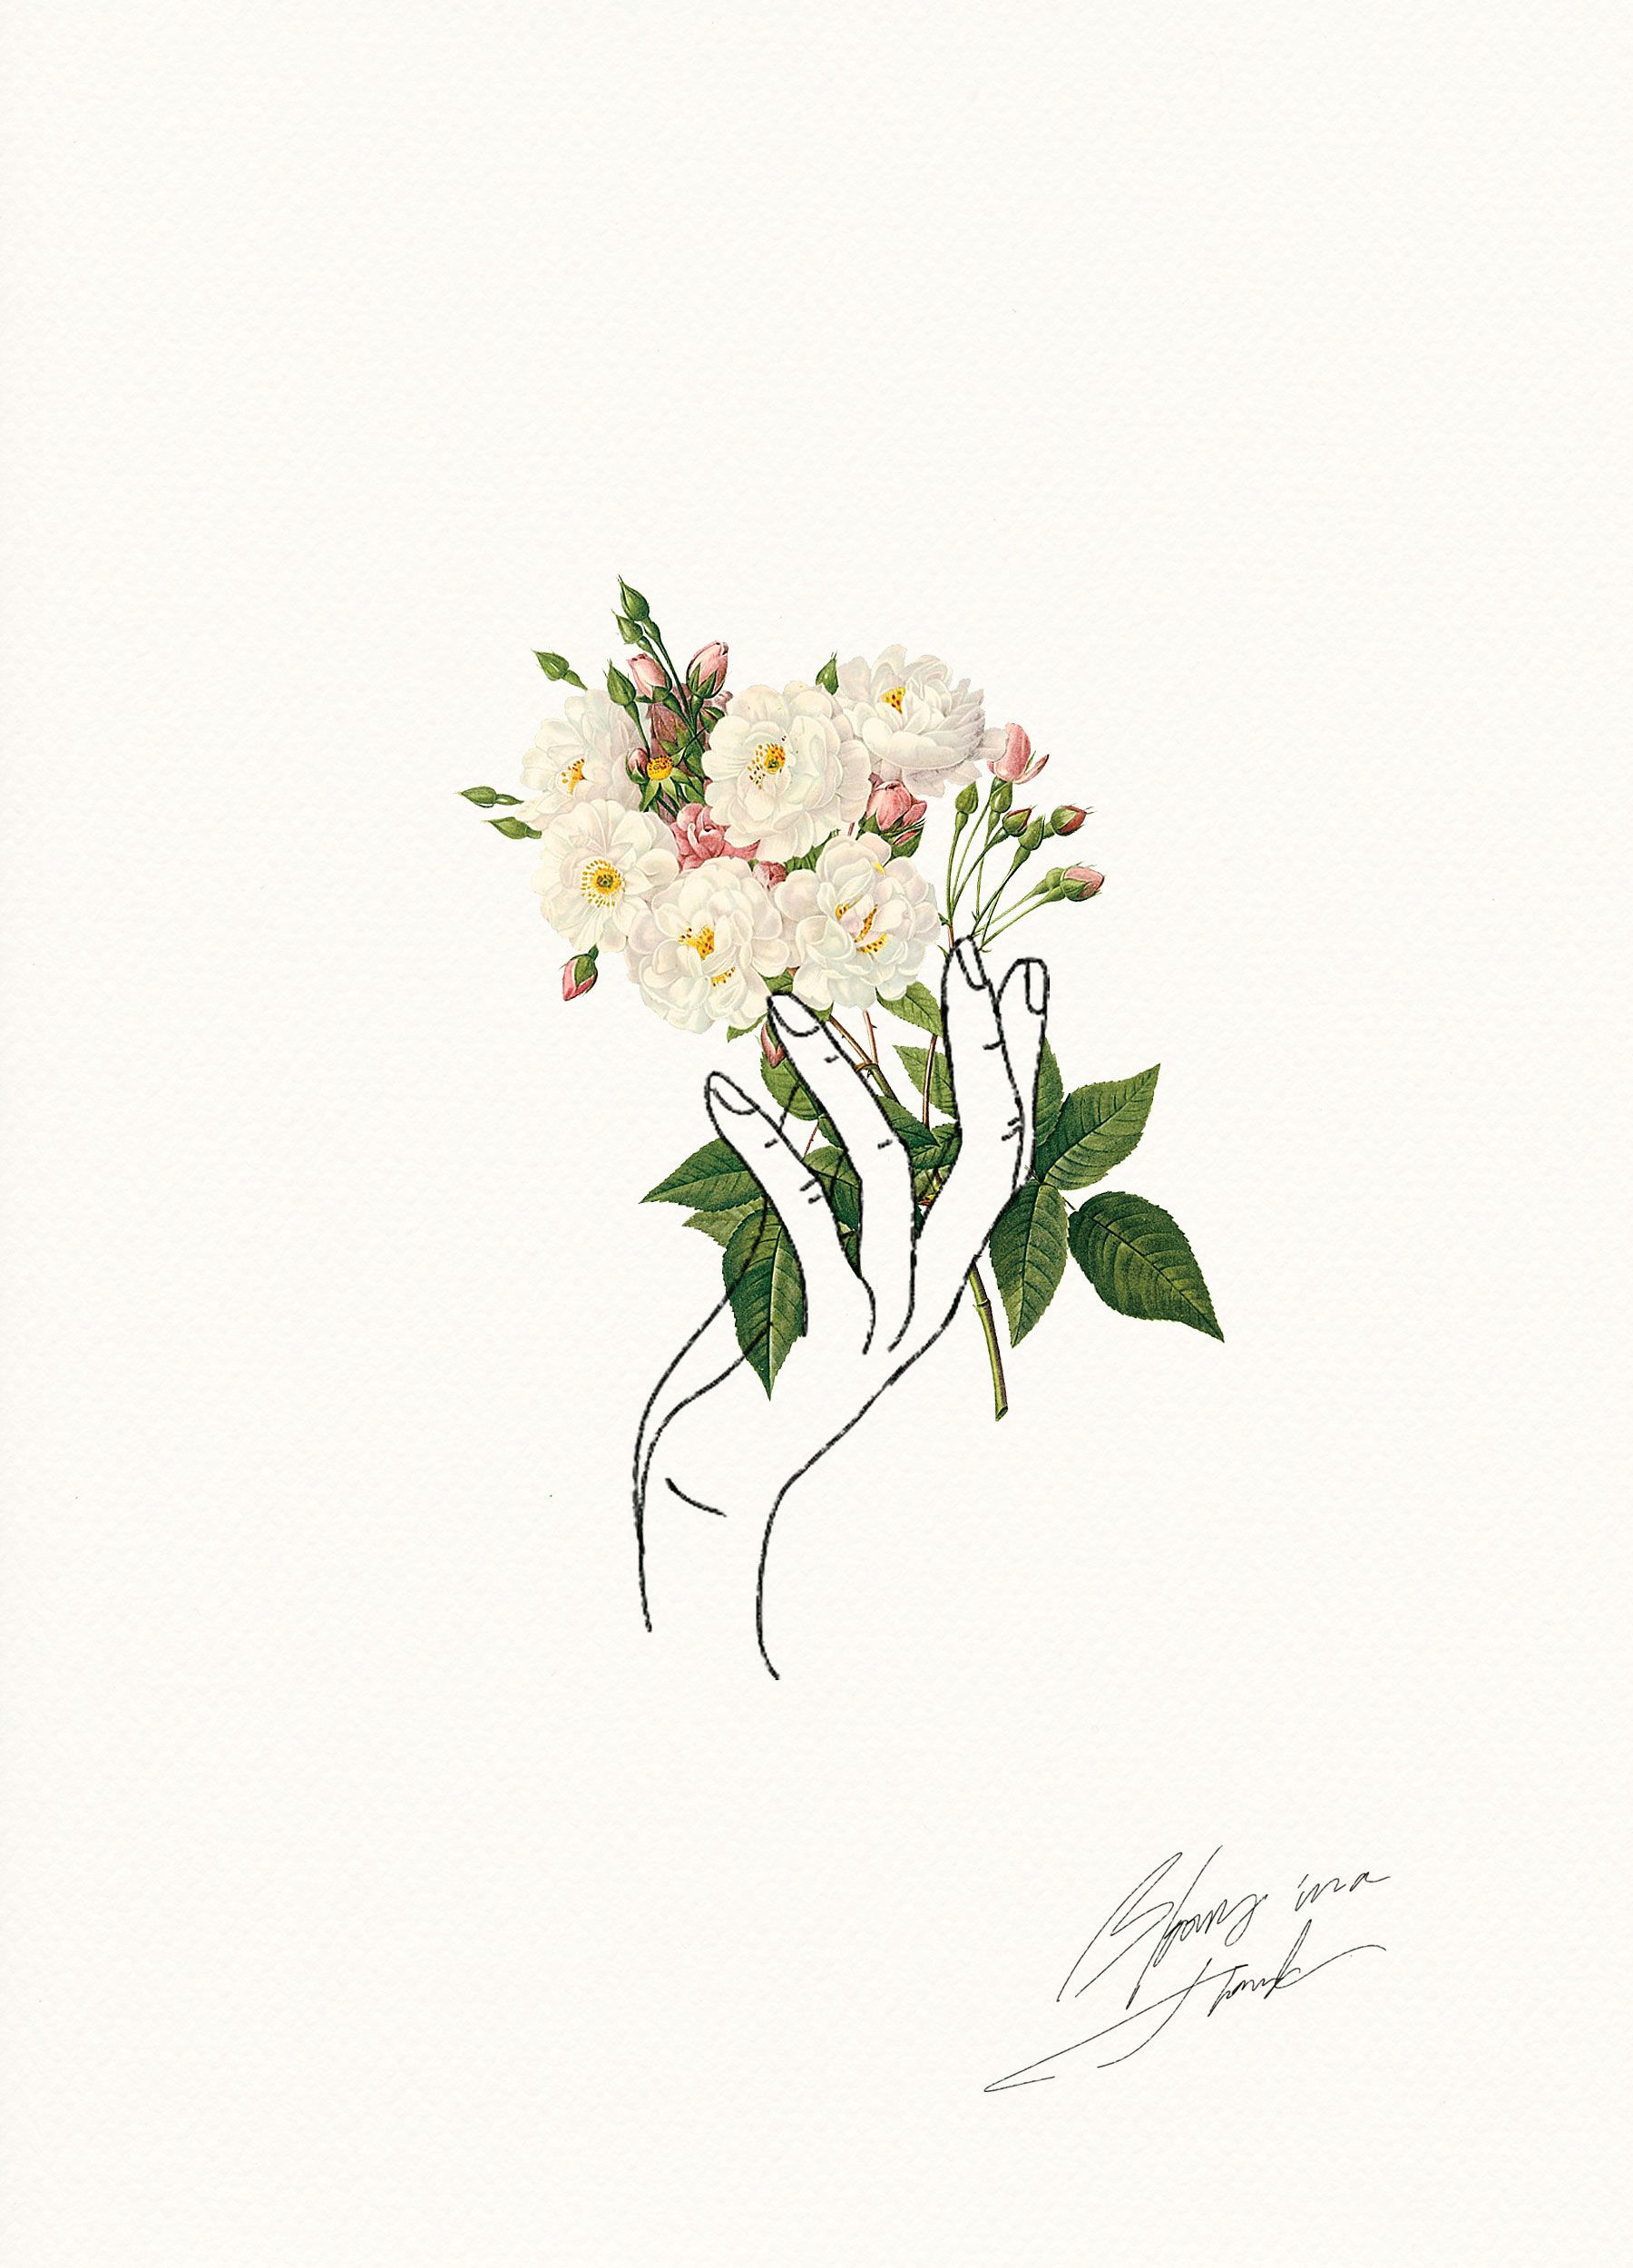 Drawings Of Delicate Flowers Holding Flowers Design Pinterest Drawings Art and Illustration